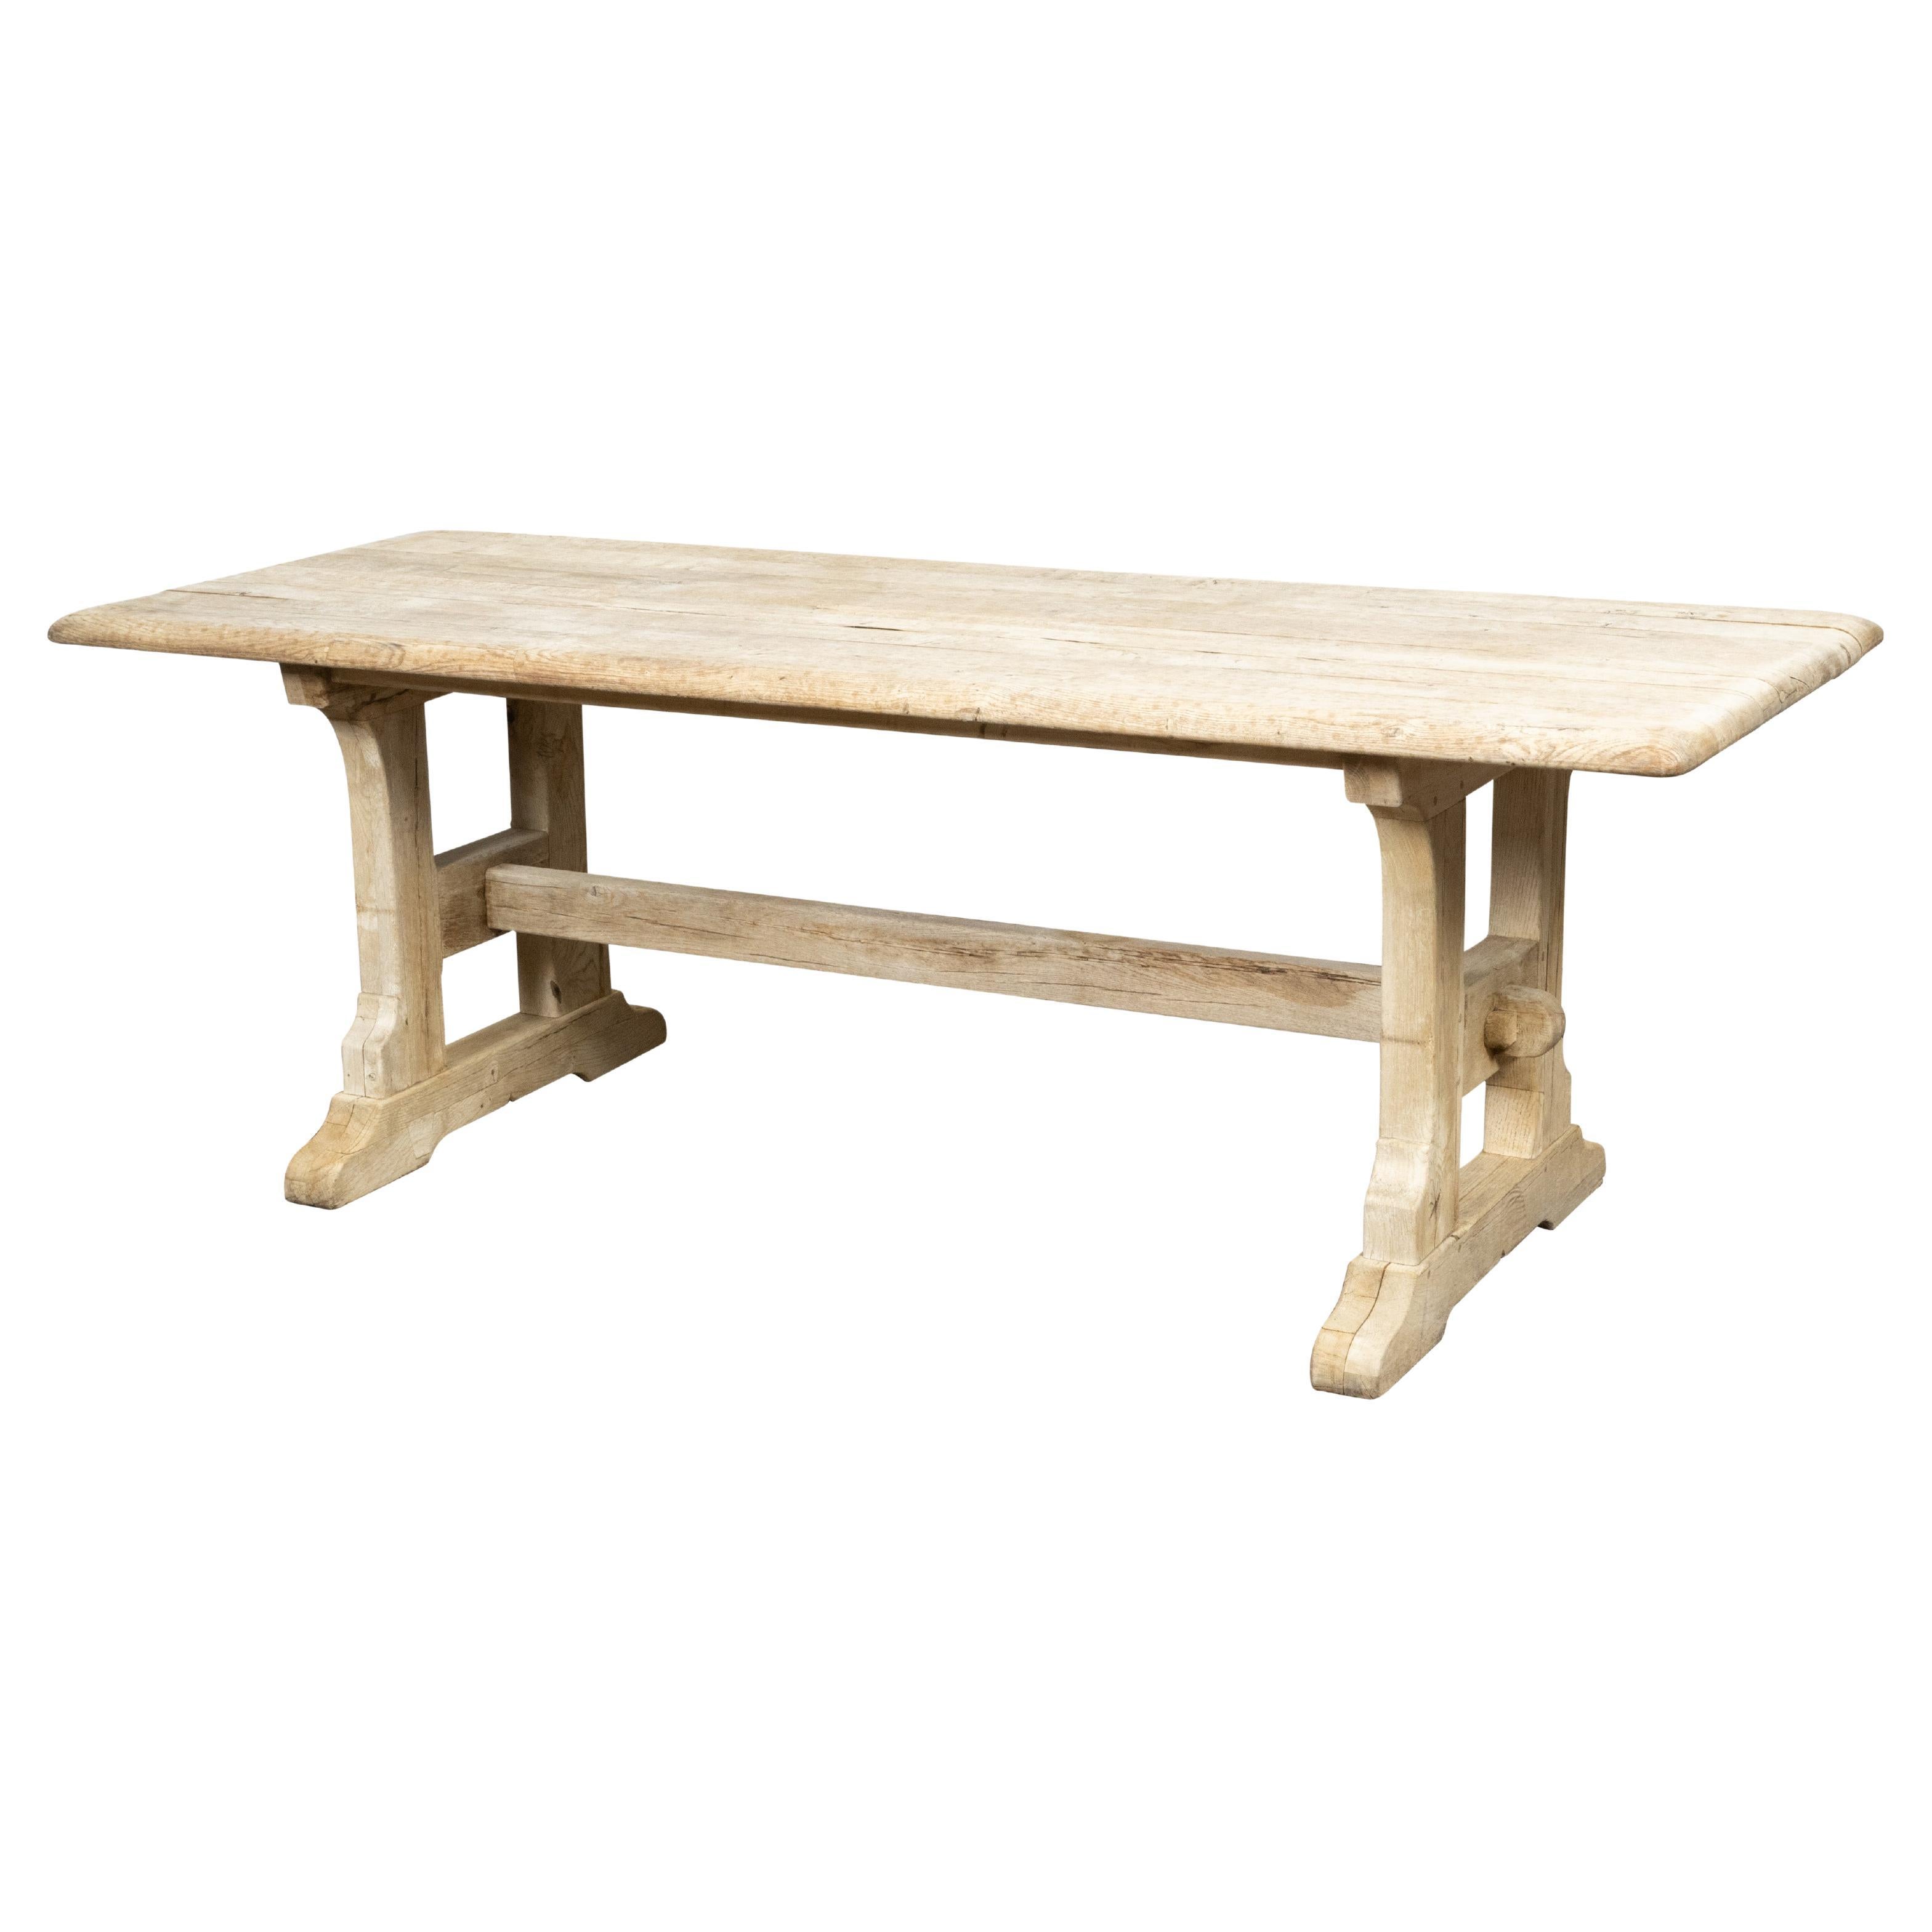 Rustic English 19th Century Natural Wood Farm Table with Trestle Base